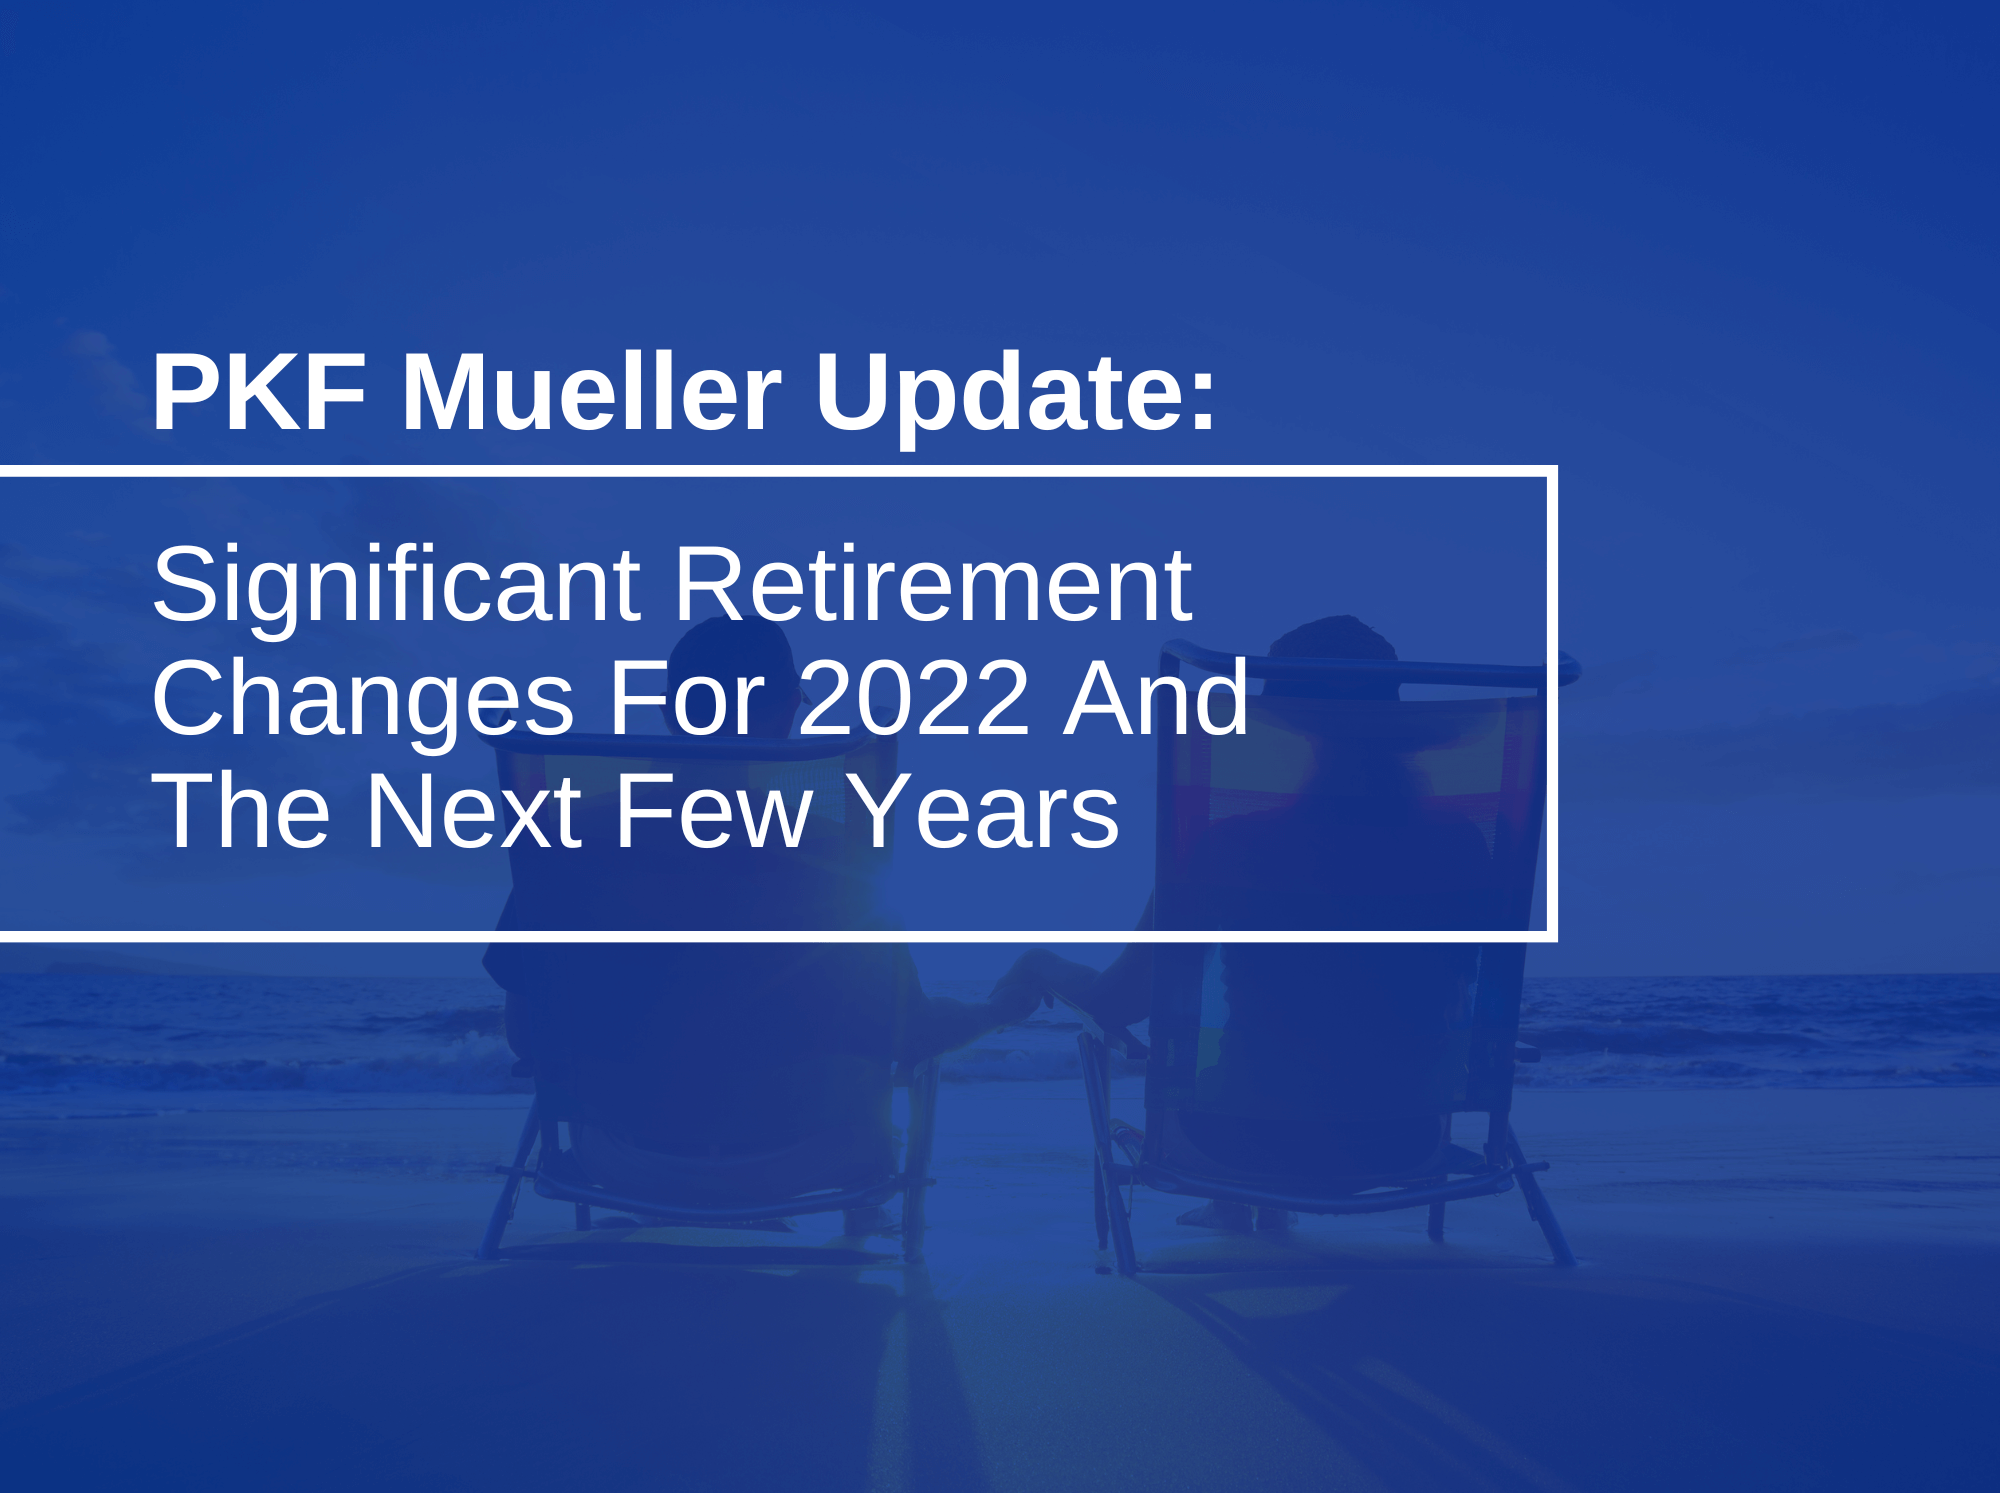 Significant Retirement Changes for 2022 and the Next Few Years